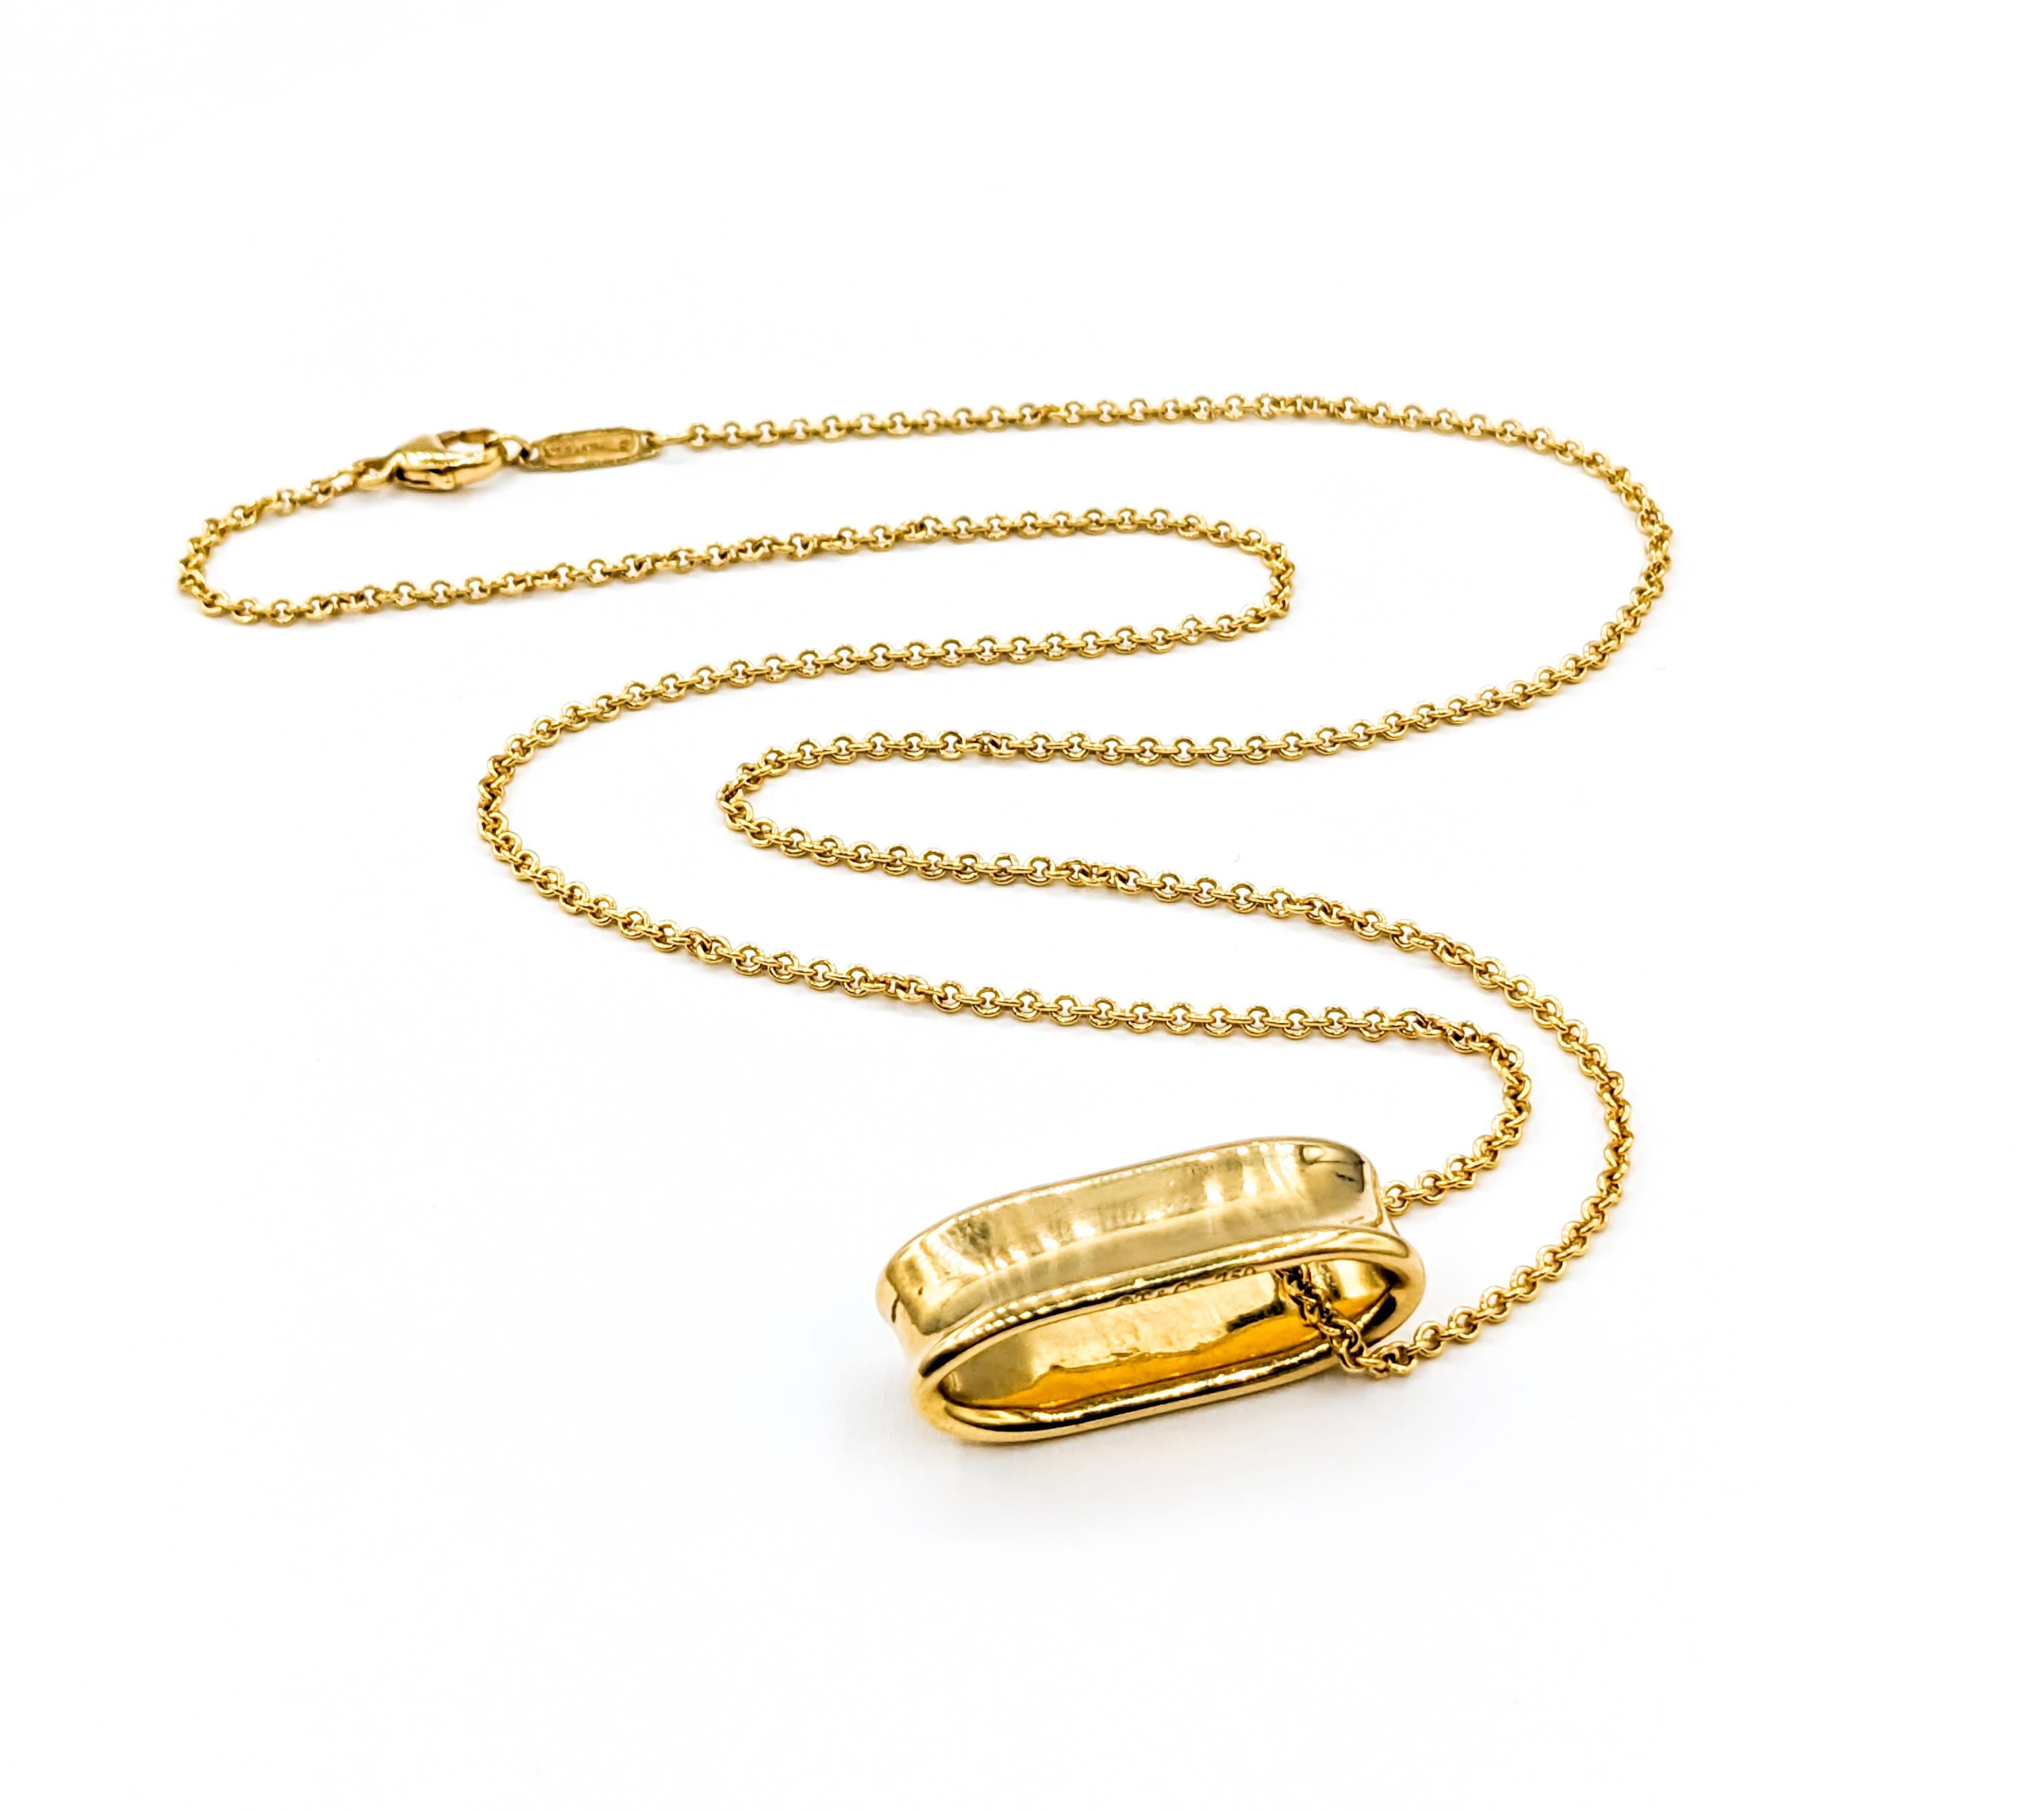 Elegant Tiffany & Co. Loop 1837 Pendant in 18kt Yellow Gold

Discover the emblem of elegance and timeless craftsmanship with this exquisite pendant, forged in the luxurious glow of 18ky yellow gold. The piece is a proud representation of the